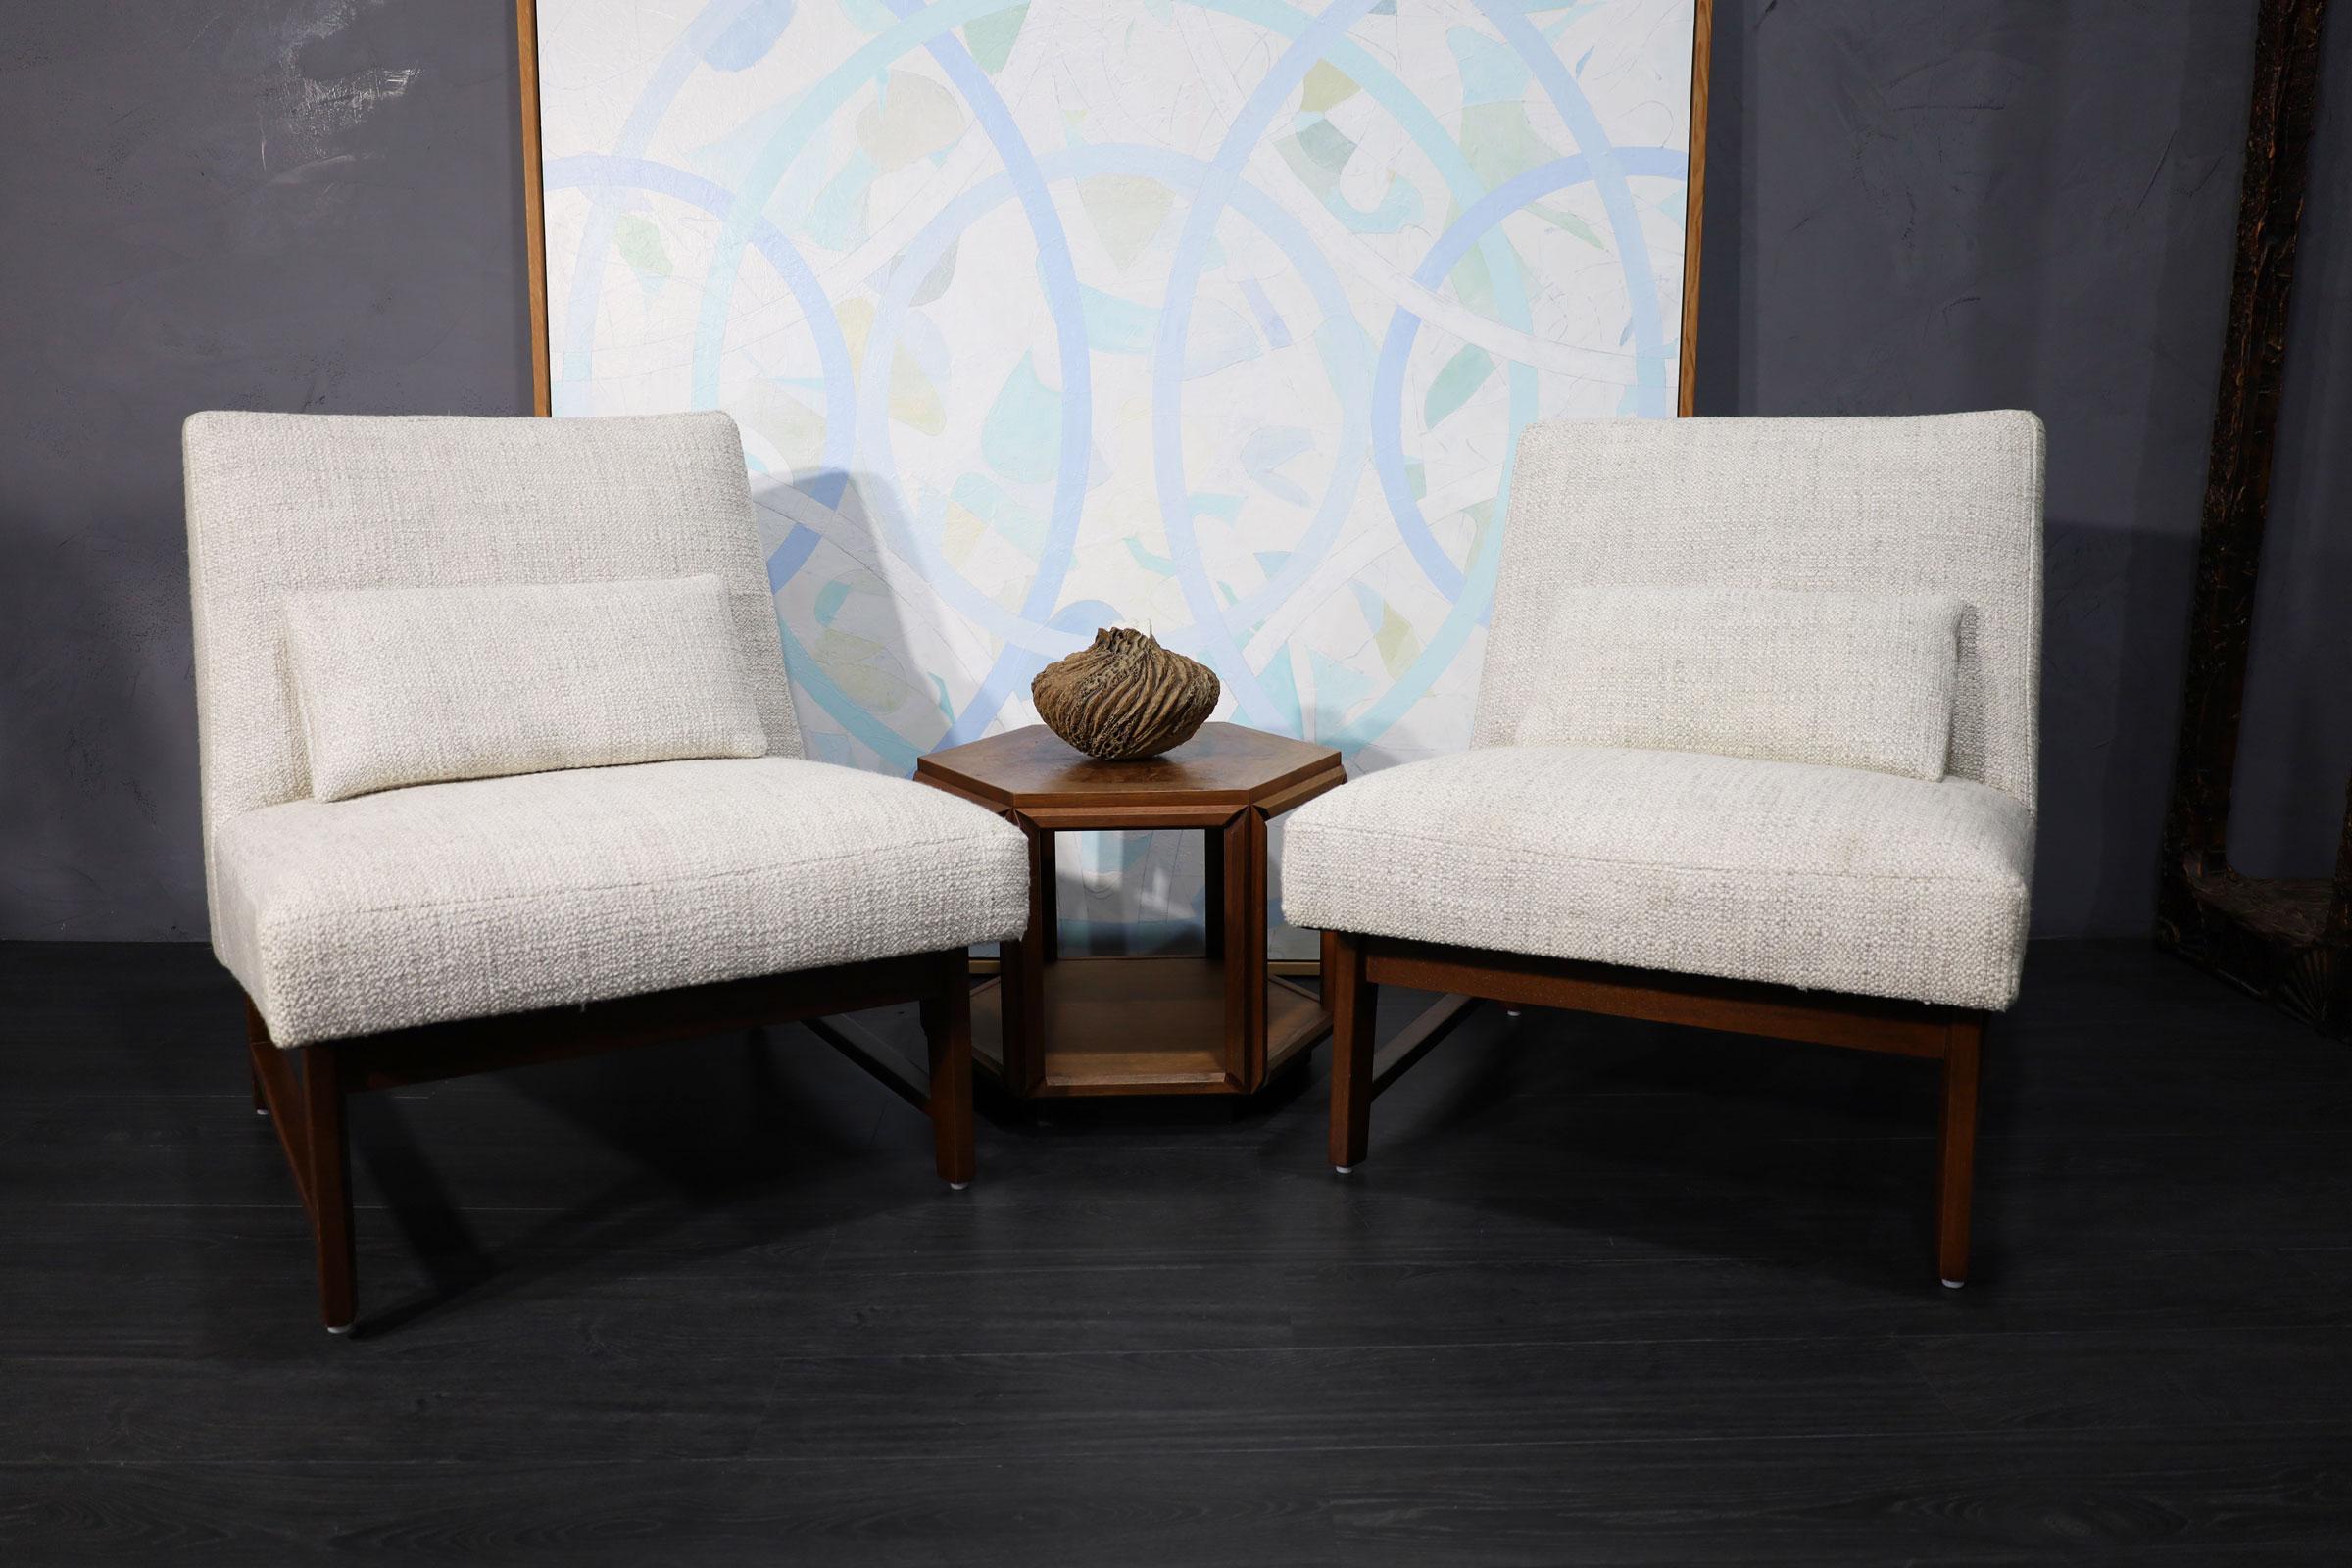 A pair of iconic slipper chairs by Edward Wormley for Dunbar. We have reupholstered these in a Holly HUnt Great Plains woven fabric of very high quality. Colors include mainly off-white.